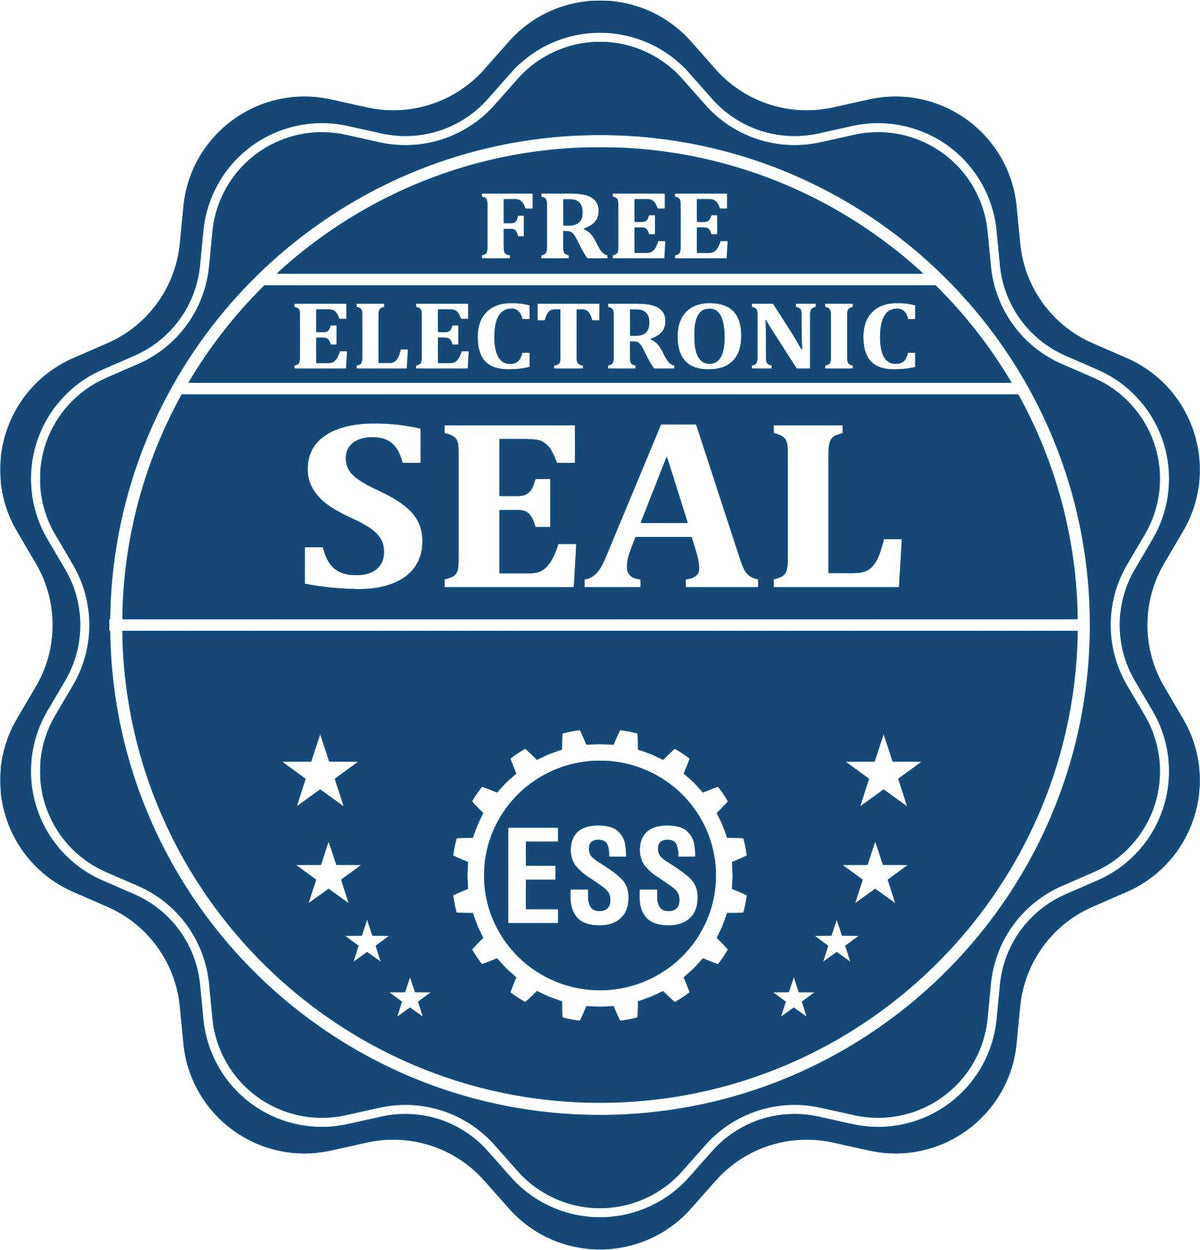 A badge showing a free electronic seal for the Hybrid Nebraska Land Surveyor Seal with stars and the ESS gear on the emblem.